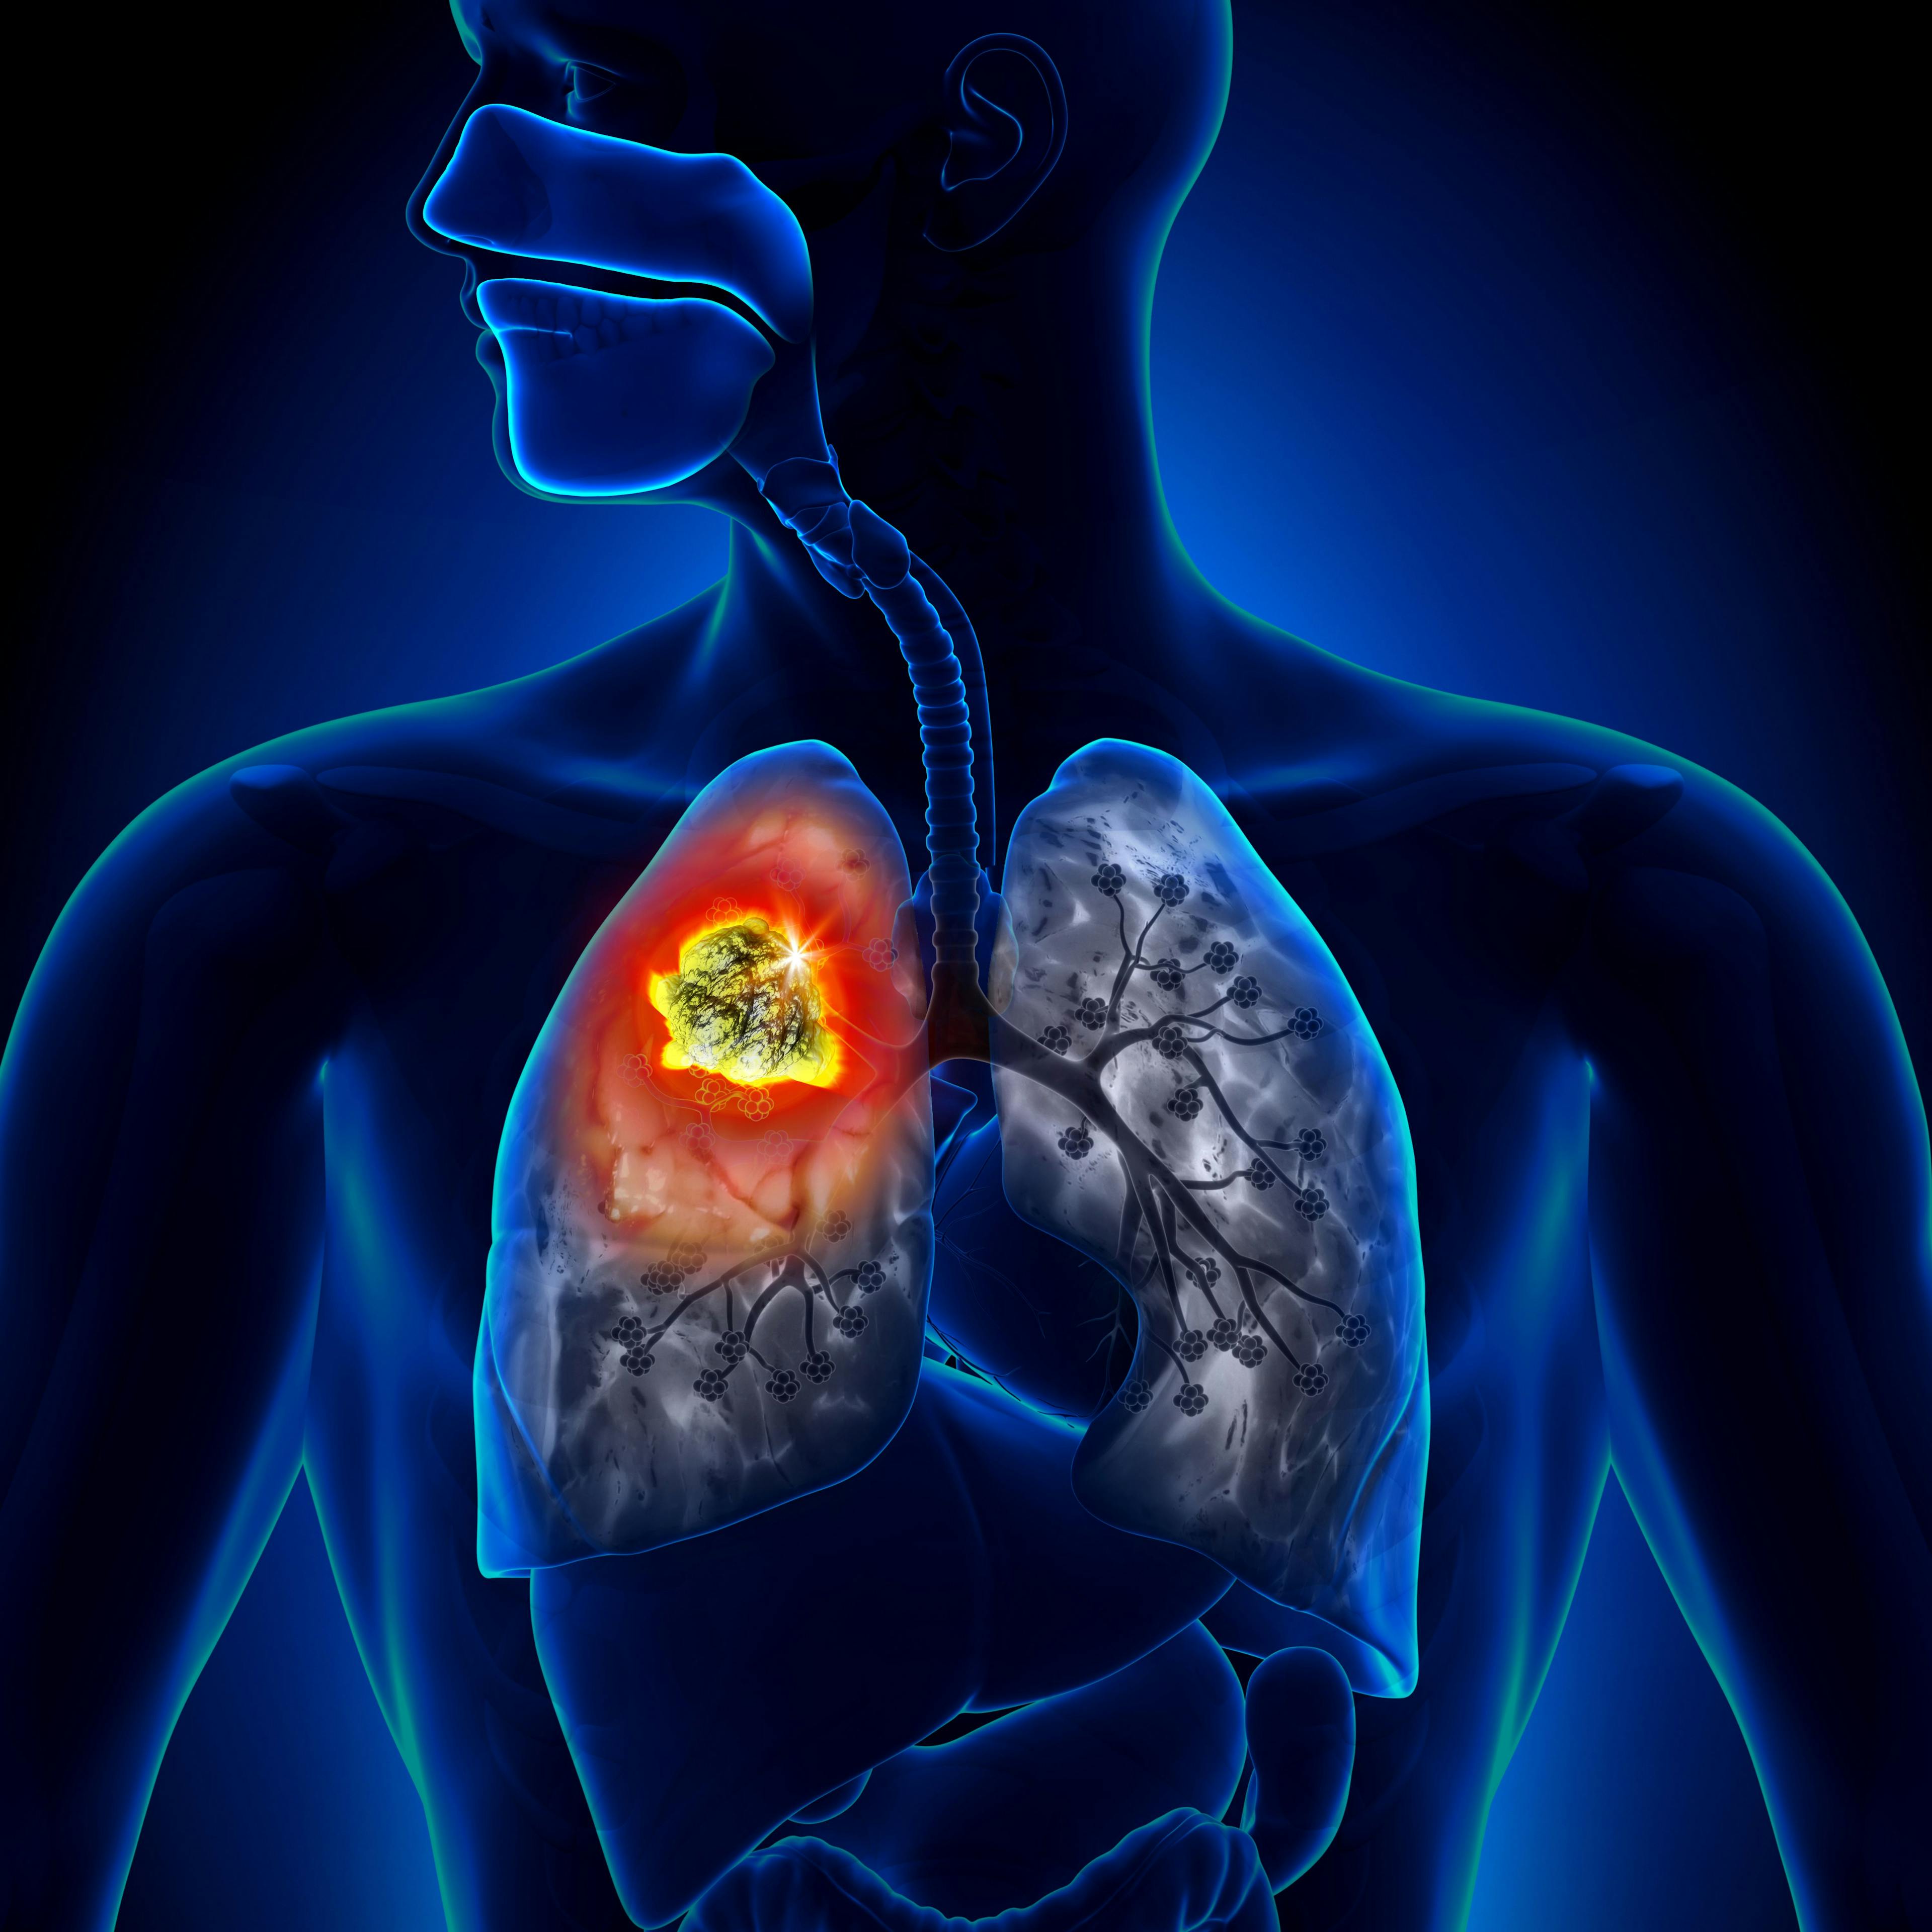 Study: Overall Patient Survival Estimates for NSCLC Are Transferable From US to Canada